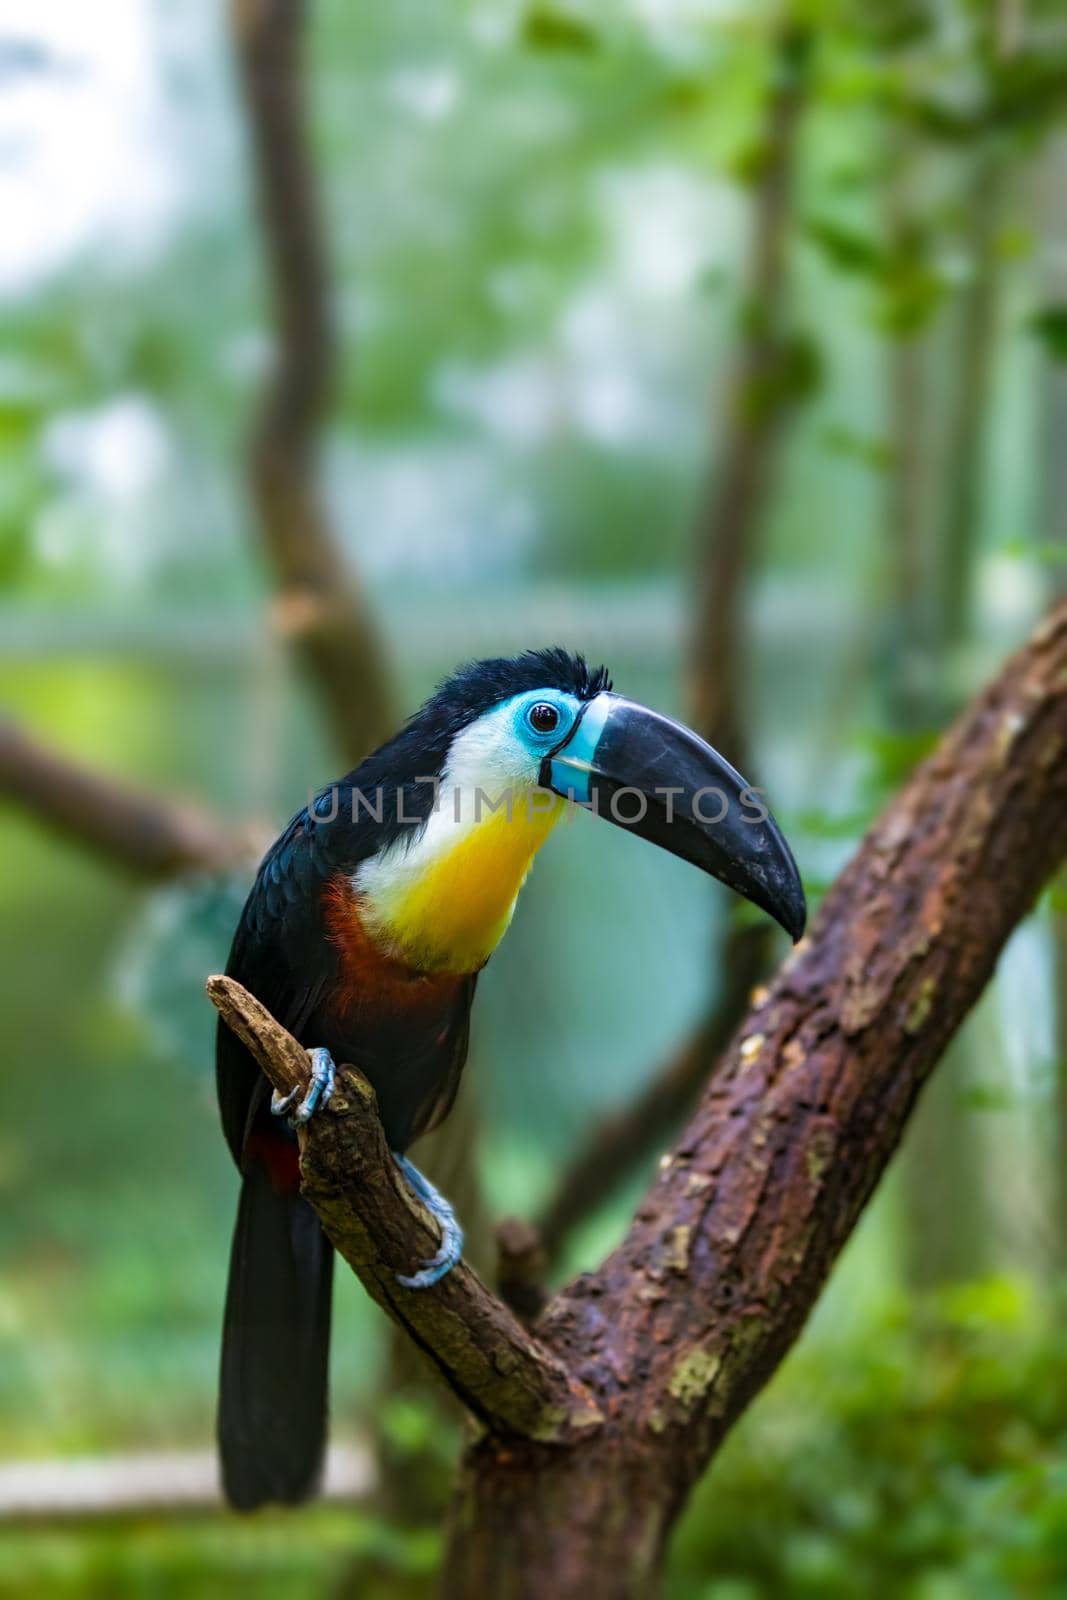 bird hannel-billed toucan (Ramphastos vitellinus) stands on the tree, the channel-billed is brightly marked and has a huge bill. Home of bird is tropical South America